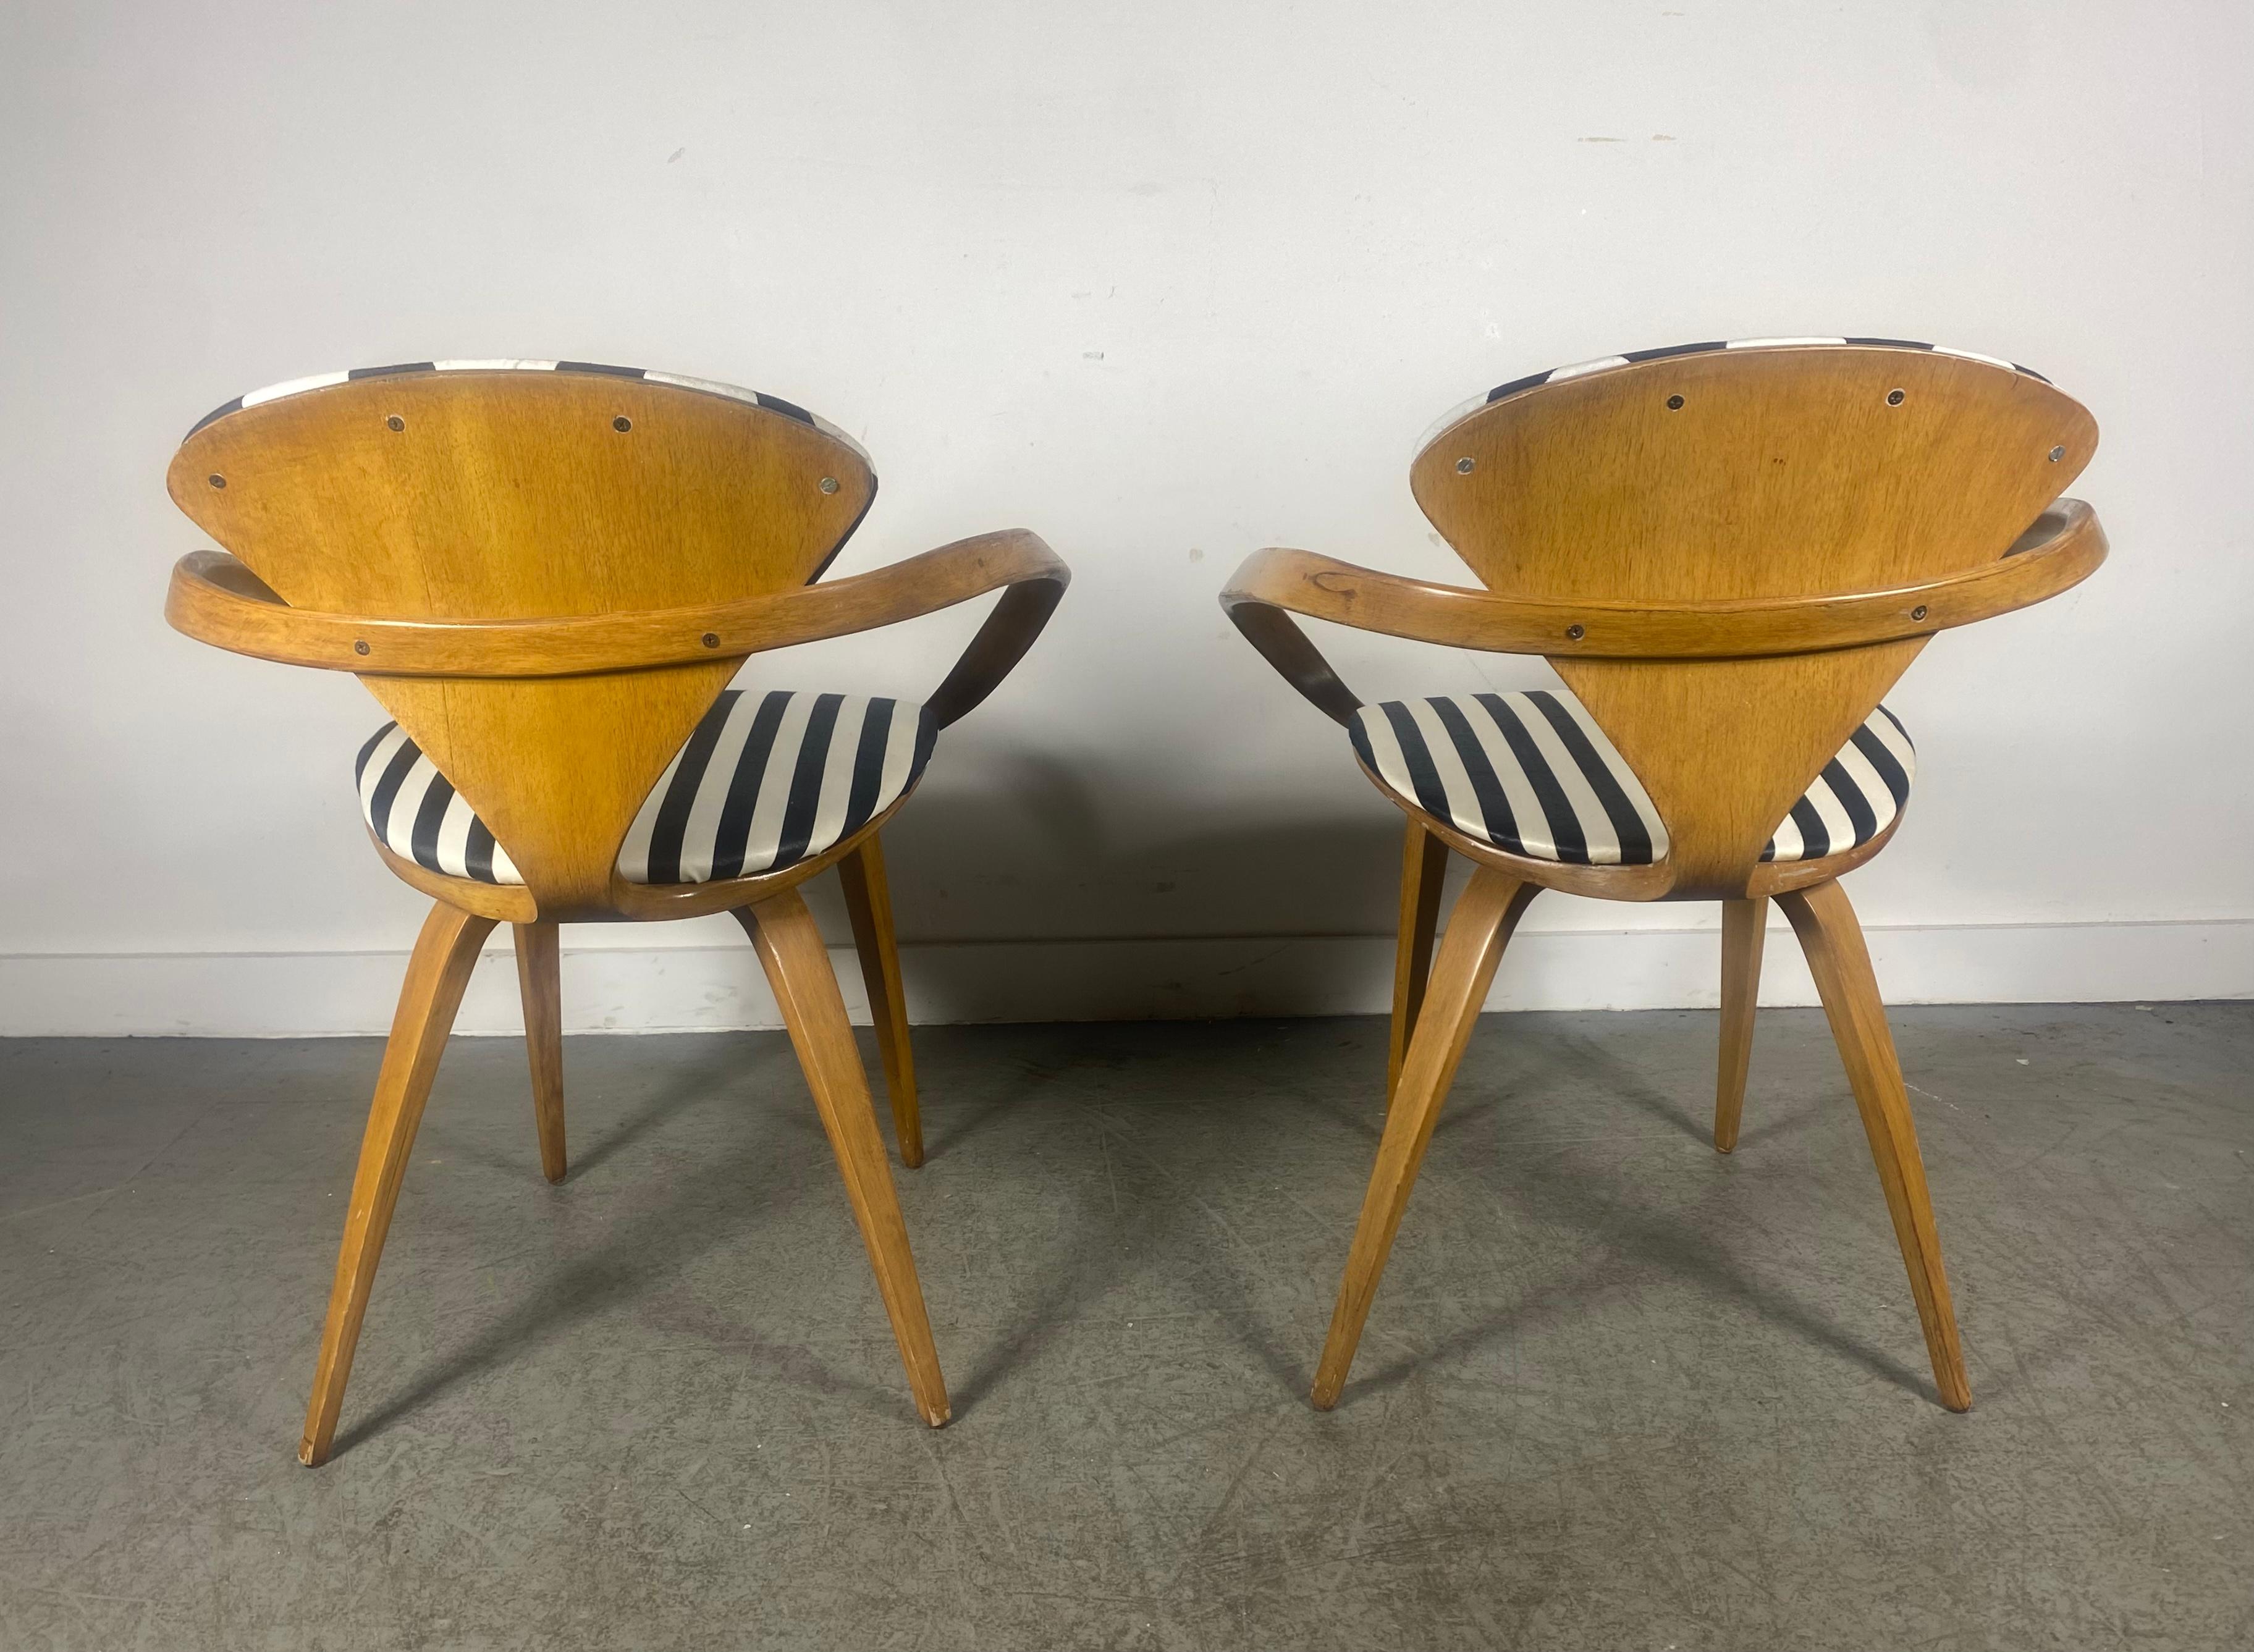 American Classic Pair Of Vintage Norman Cherner Plycraft Armchairs c. 1950's For Sale